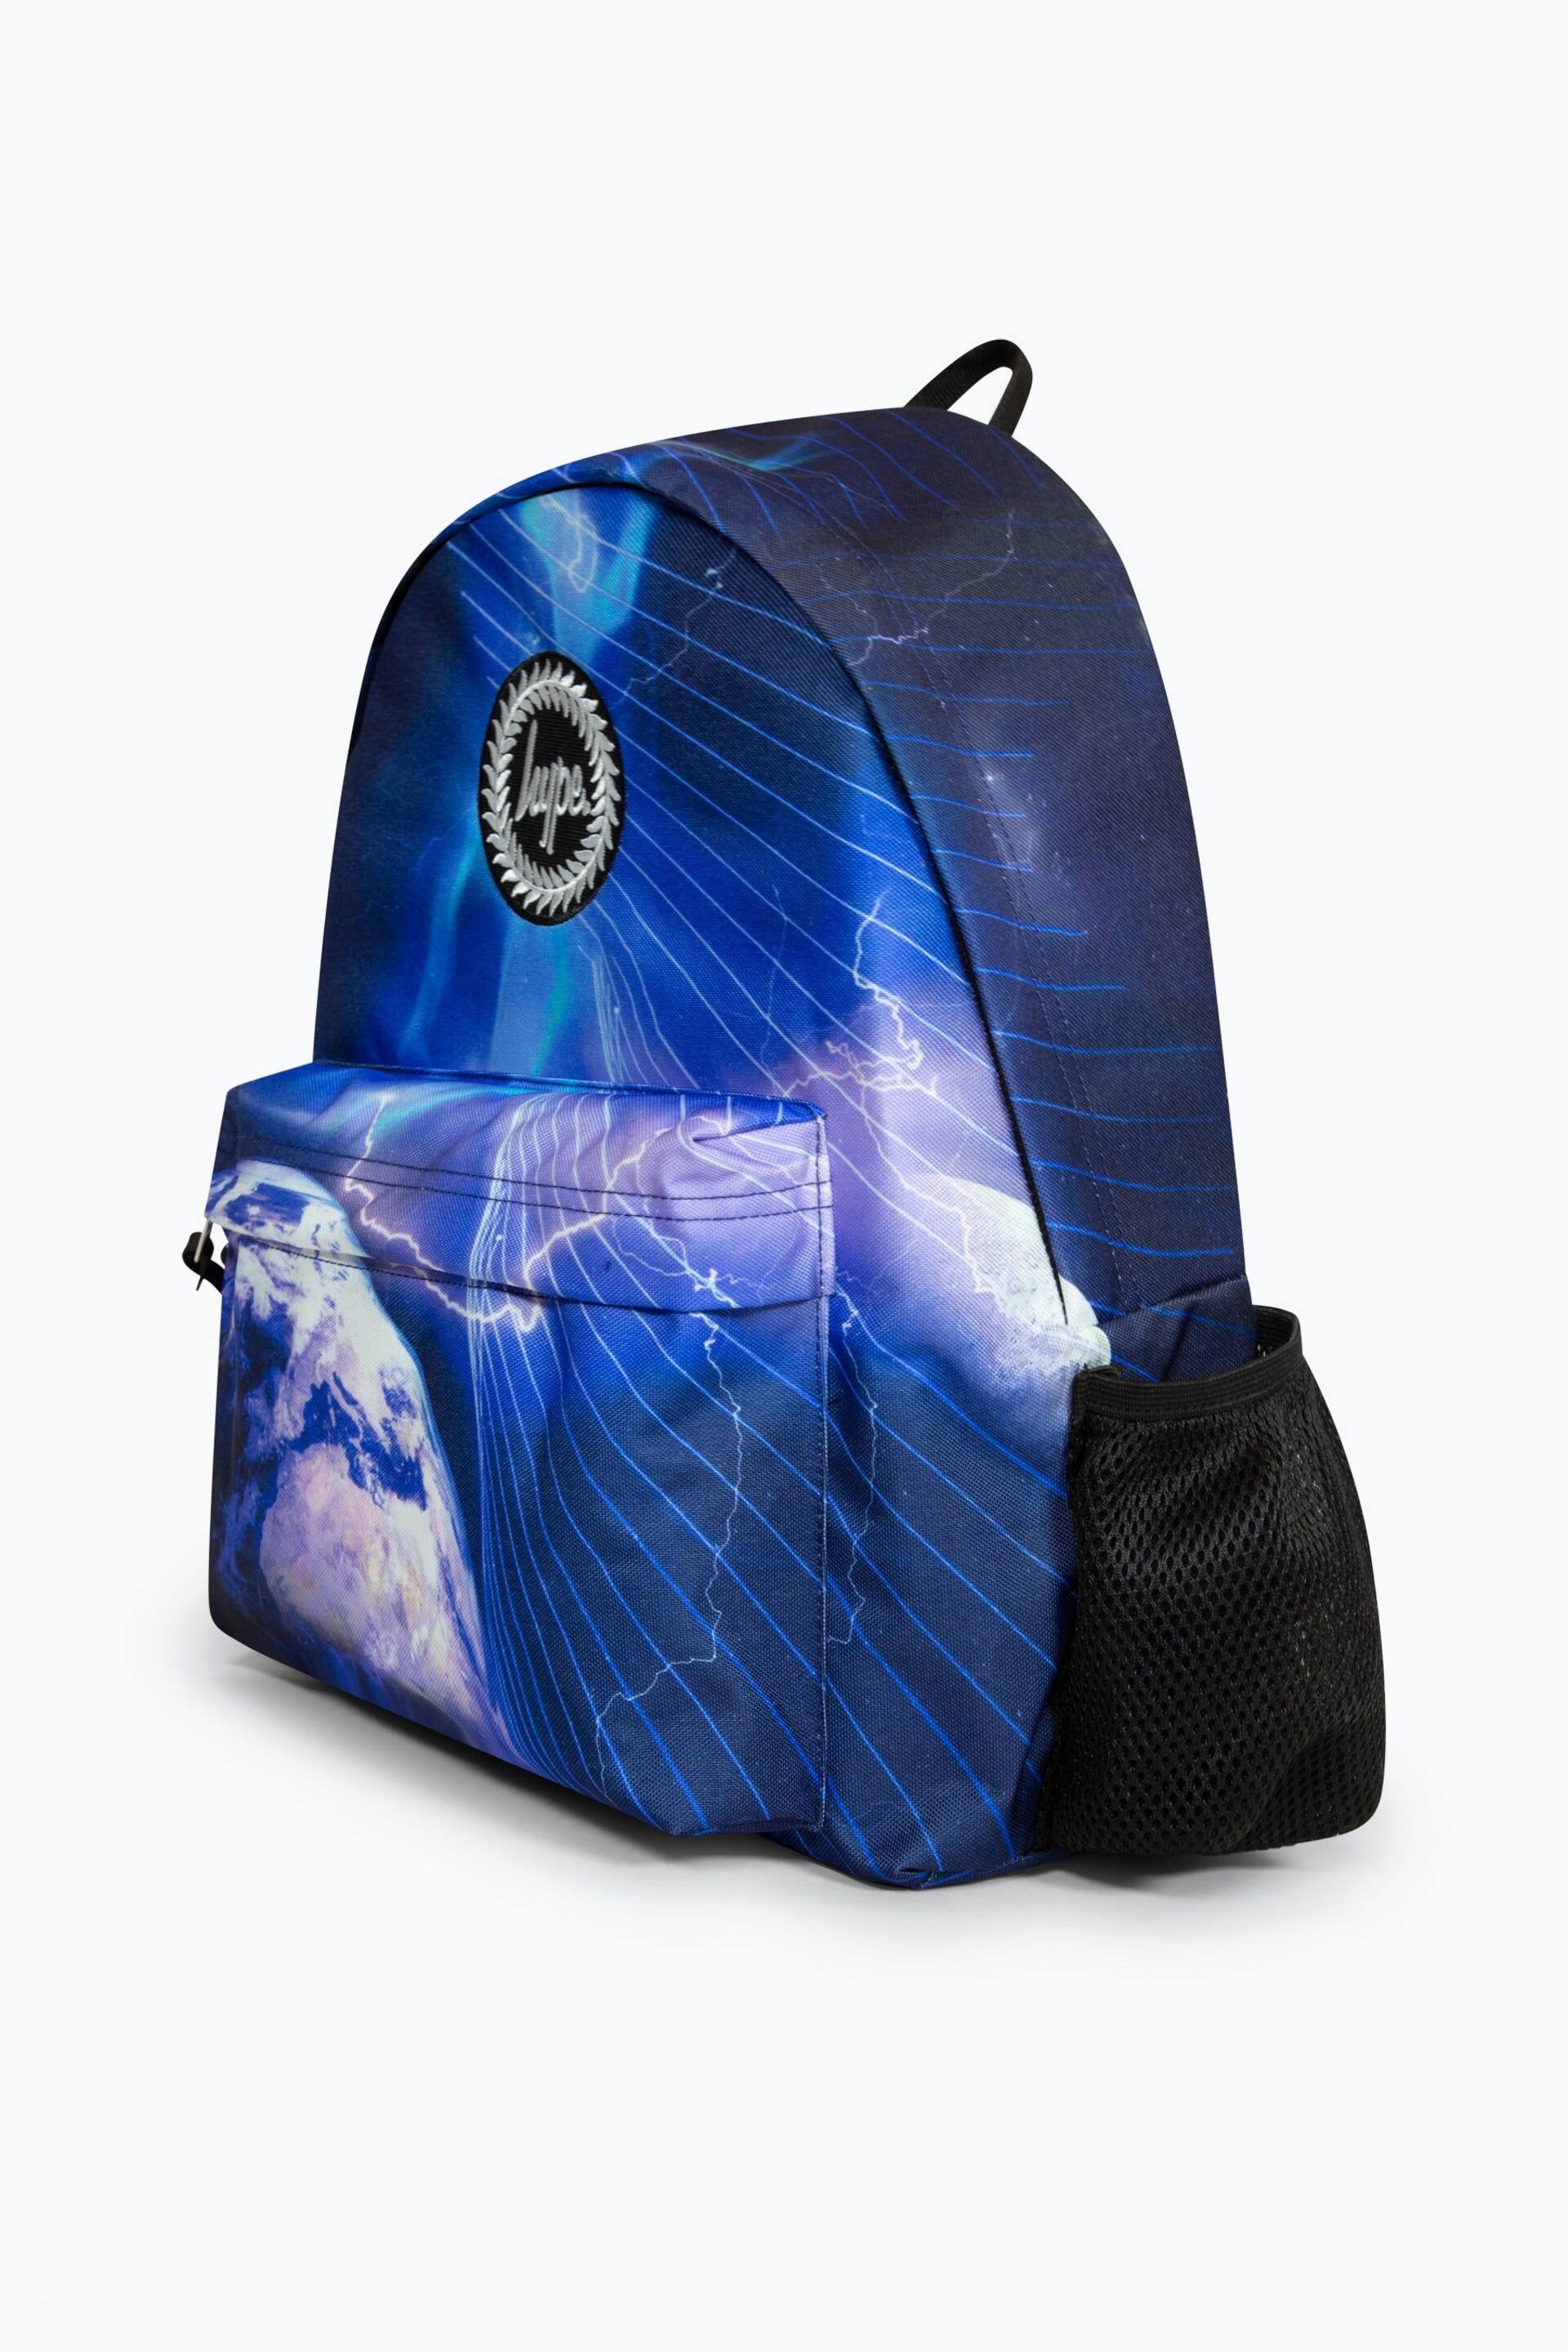 Hype. Space Storm V2 Badge Backpack - Image 4 of 10